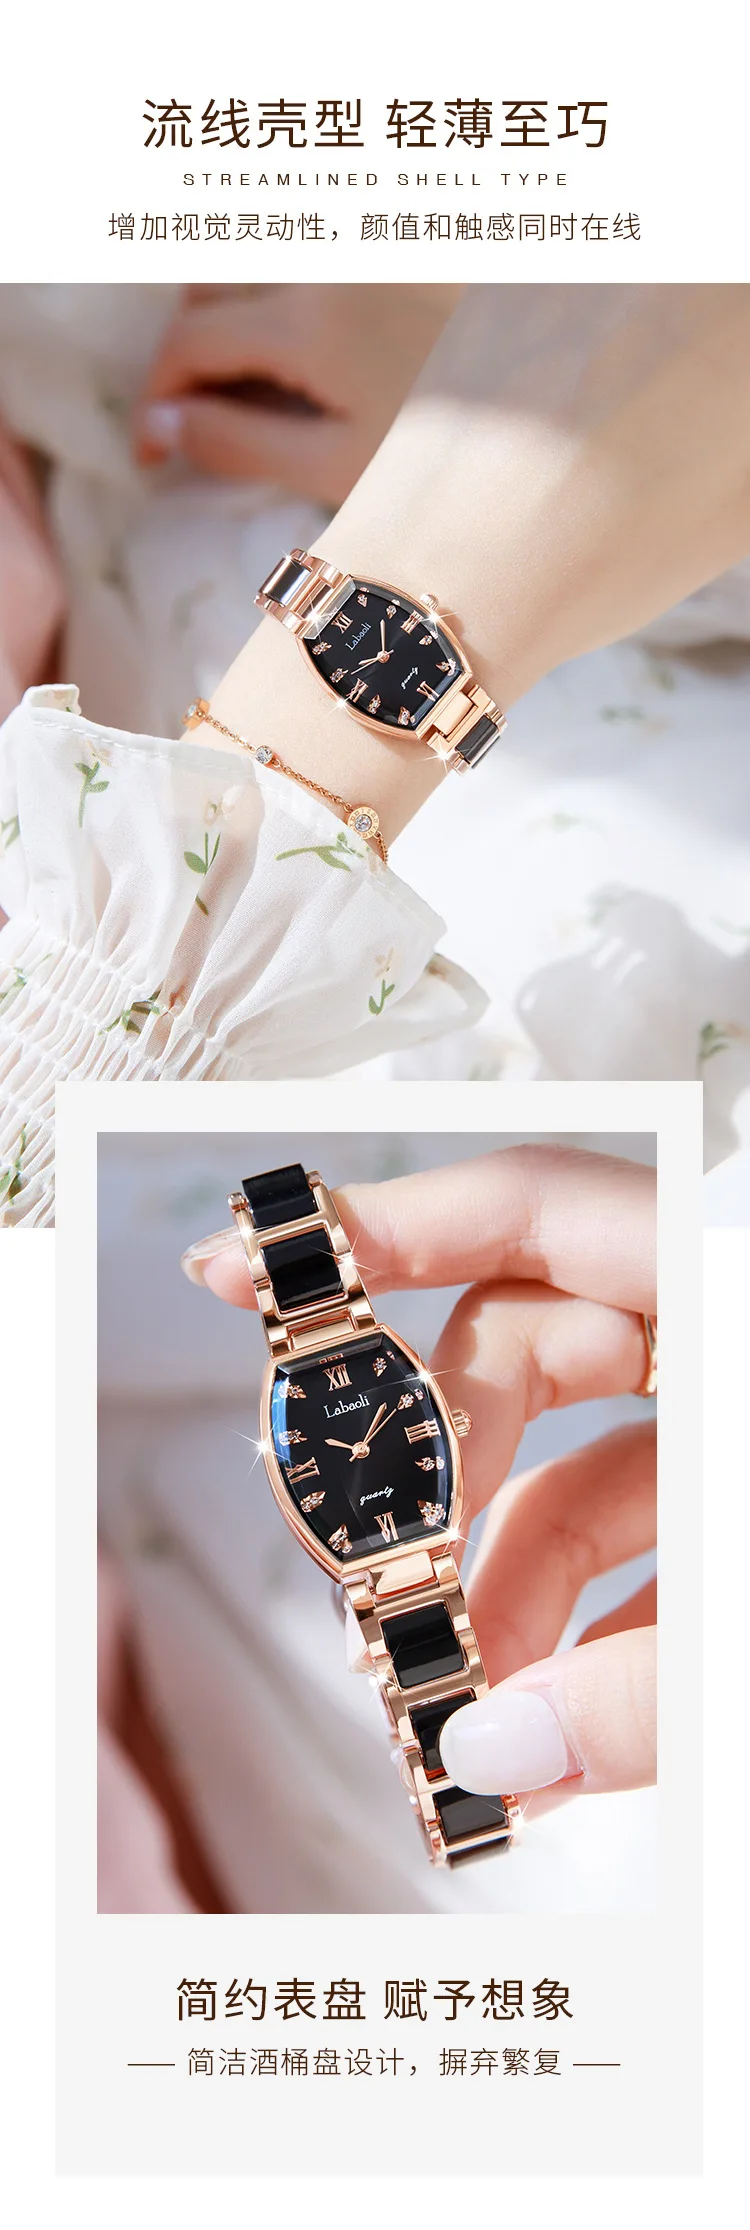 LABAOLI Tonneau Dial Women Watches Top Brand Luxury White Rose Gold  Stainless Steel Band Ladies Wrist Watch New Arrival Dropship